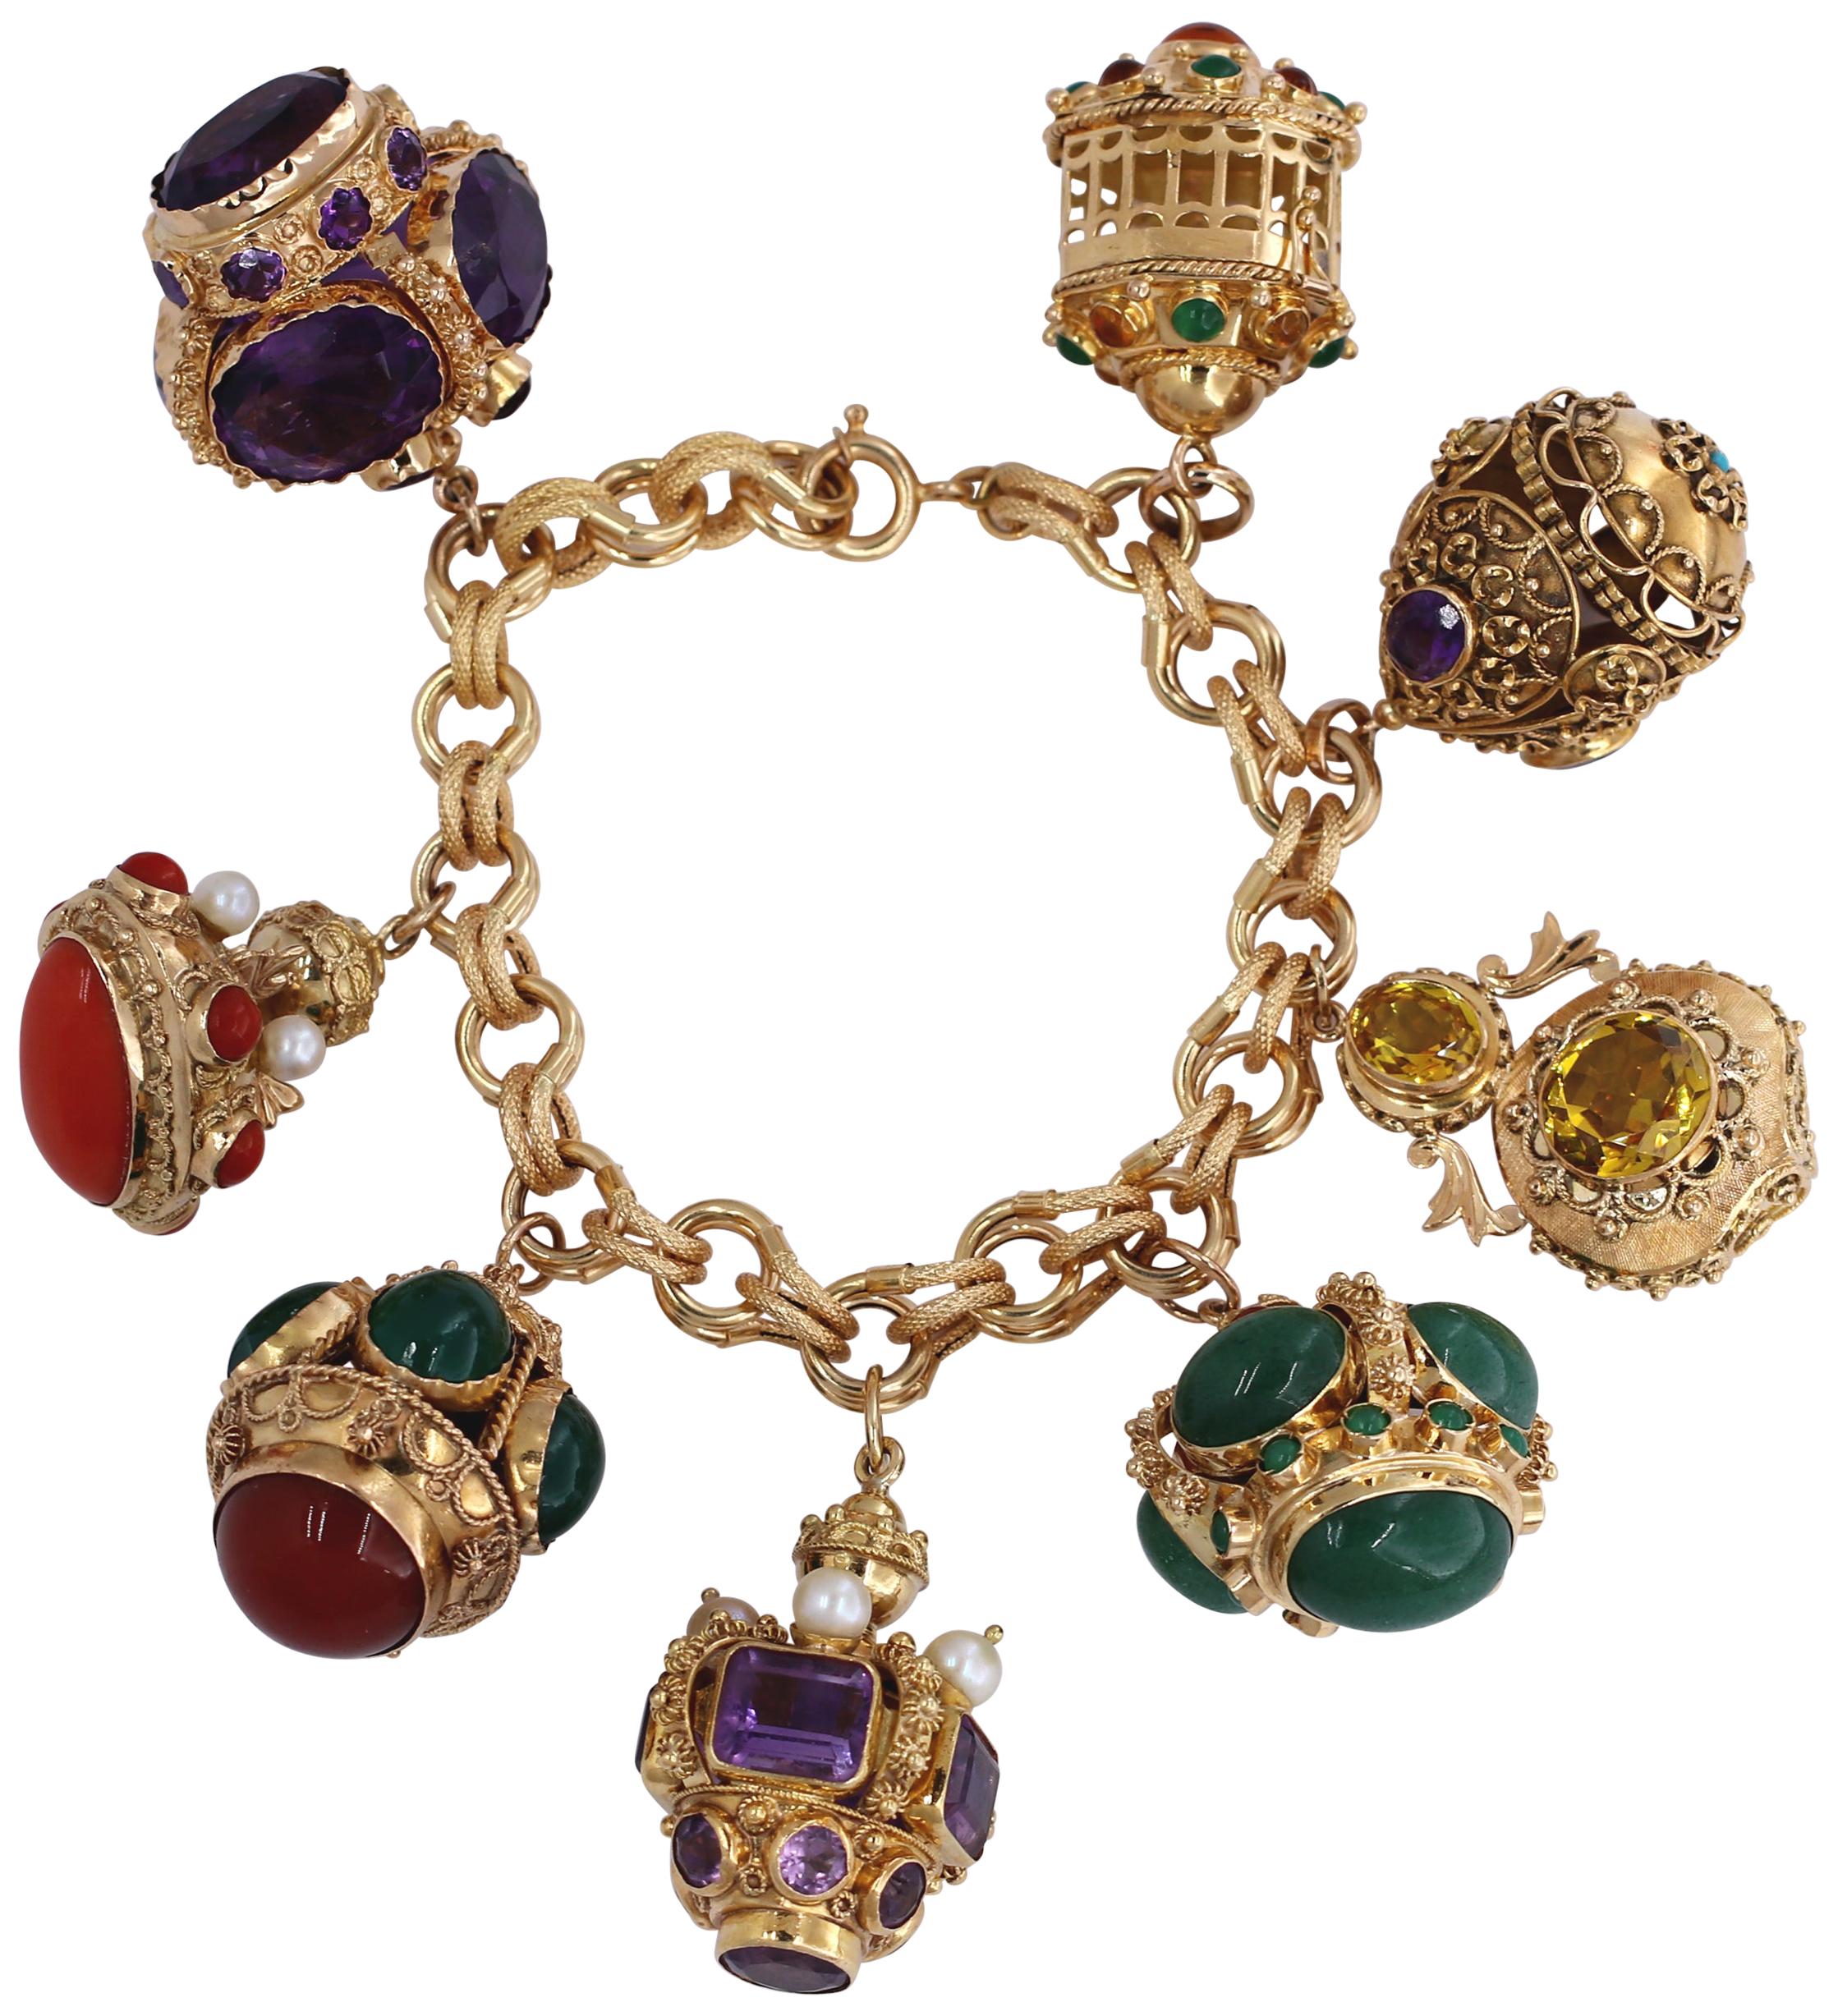 Midcentury Large Italian Gold Charm Bracelet with Assorted Colored Stones